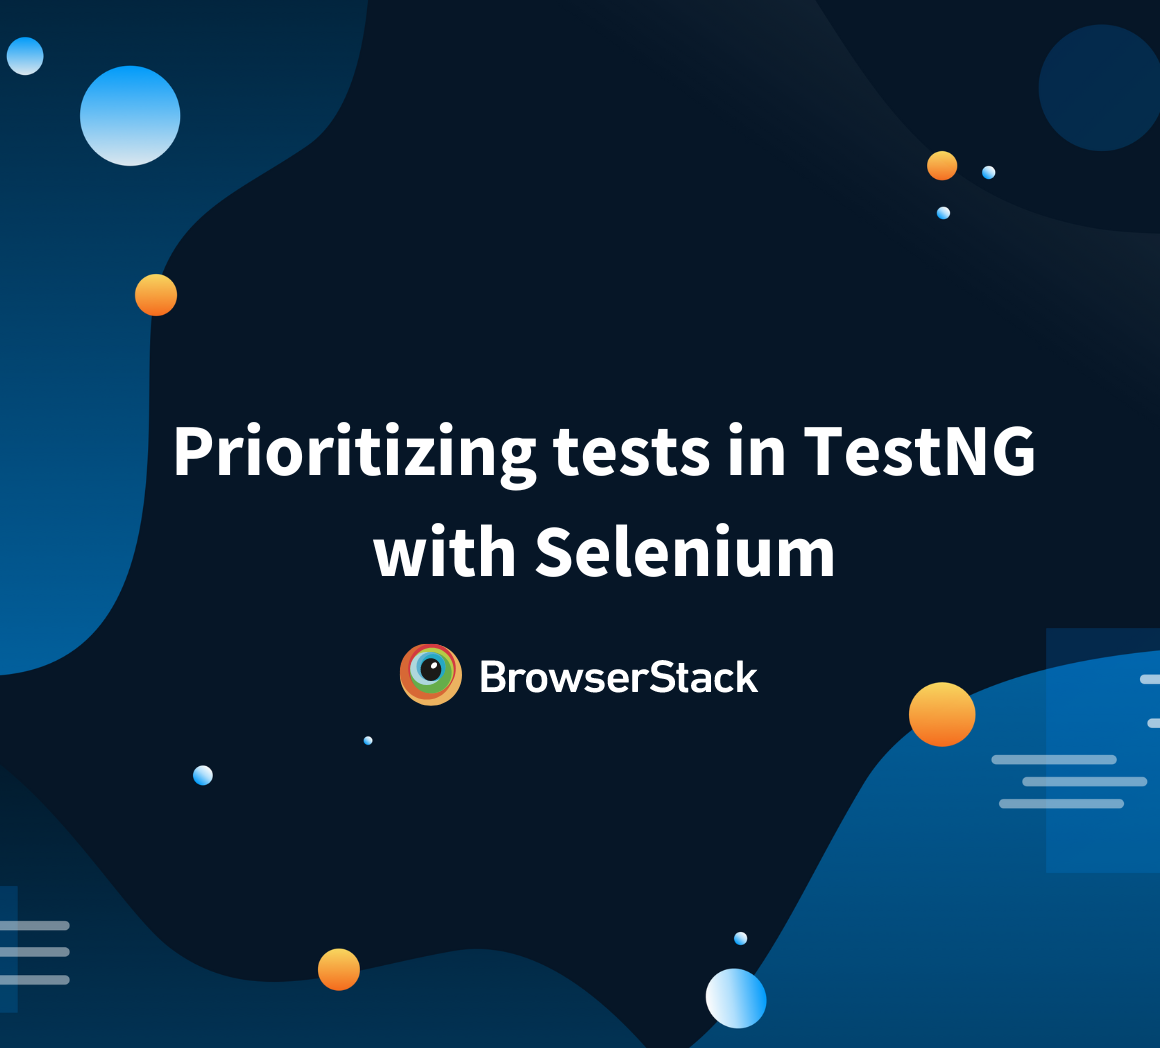 Prioritizing tests in TestNG with Selenium